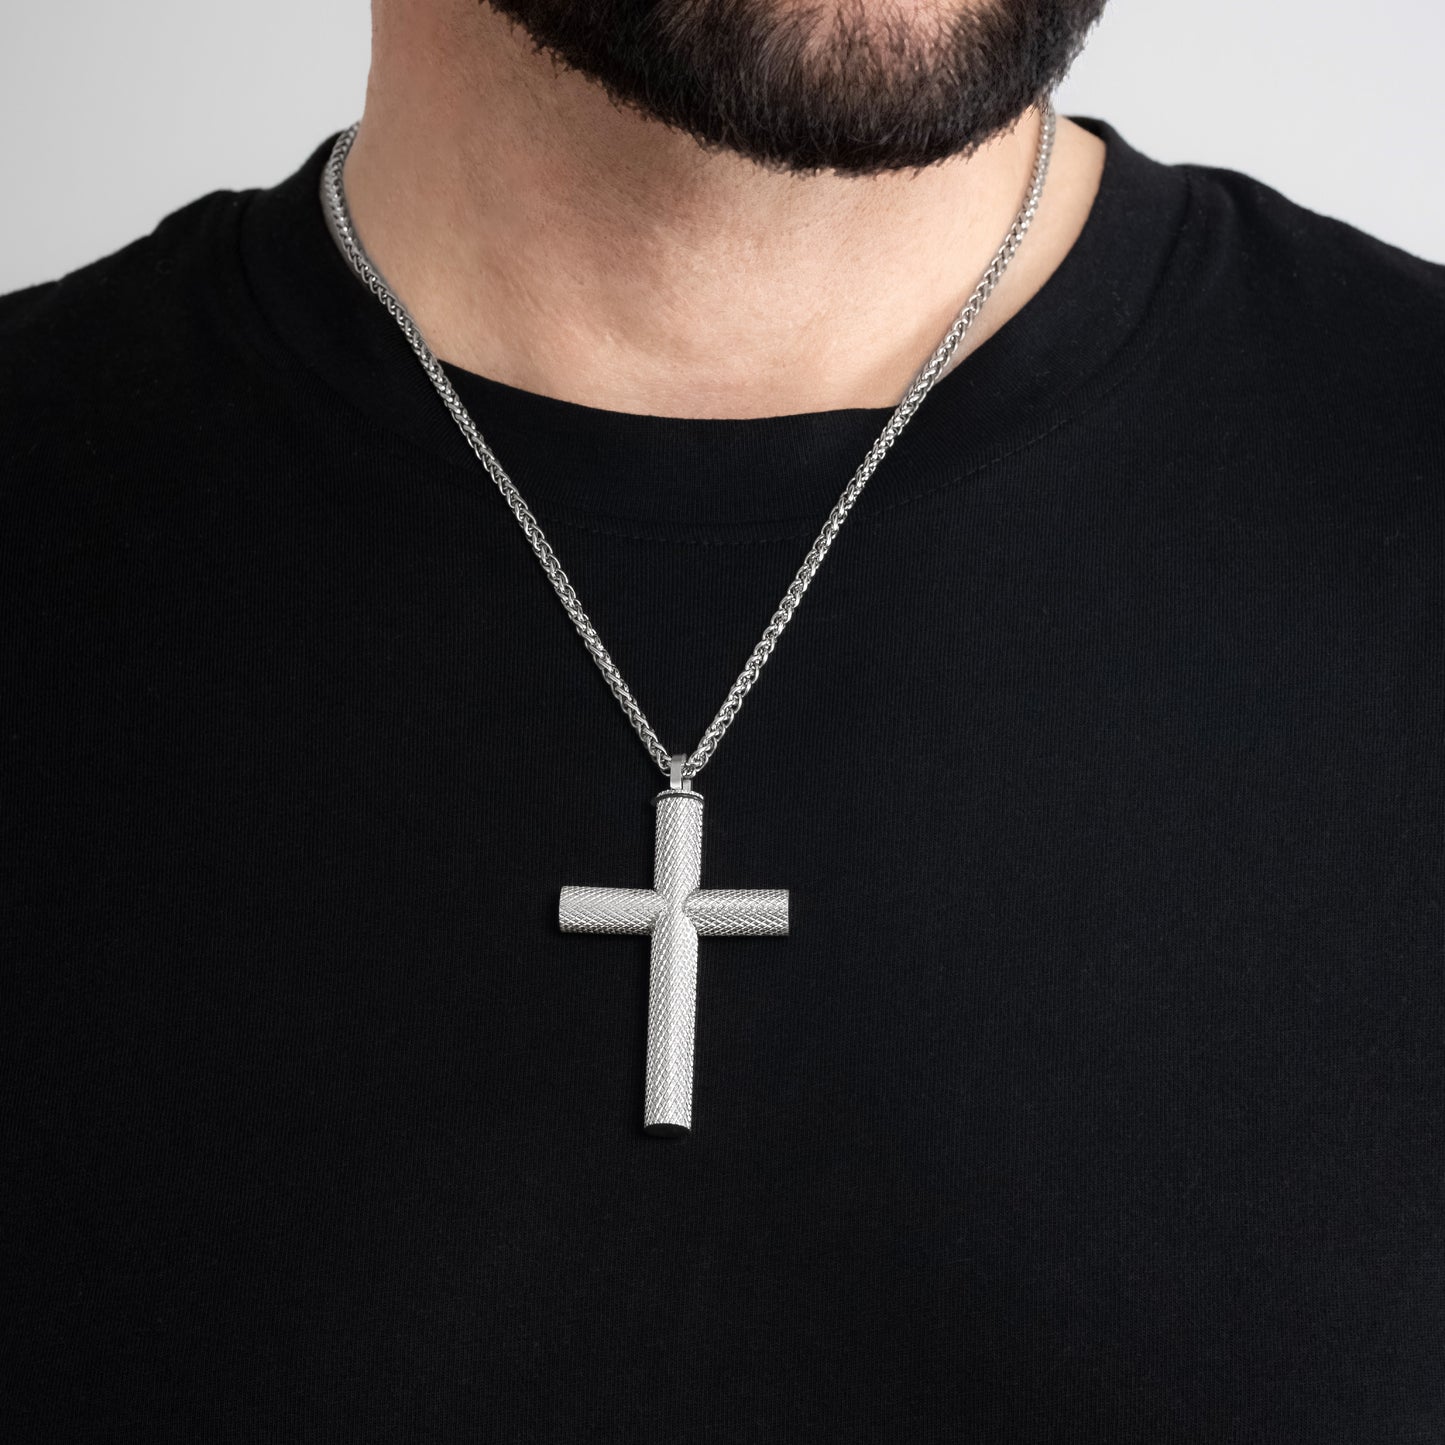 A male model in a black t-shirt wearing a Bison Cross Silver Self-fill Pendant with a 3mm Silver Spiga chain 22 inches. Close-up image of the non-tarnish trending religious men's necklace.